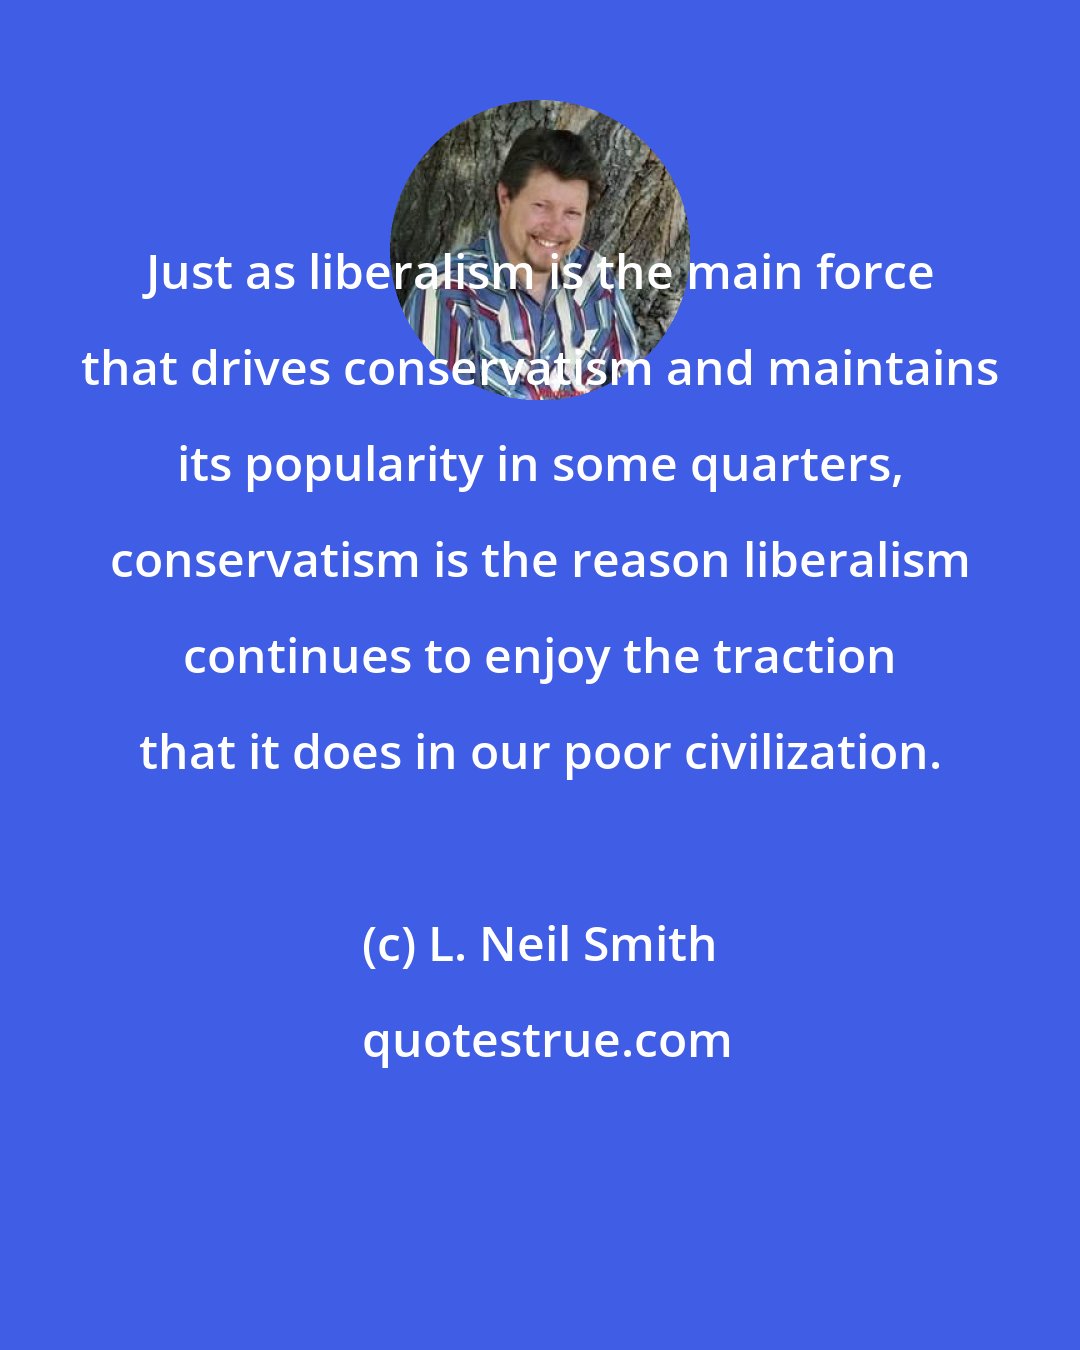 L. Neil Smith: Just as liberalism is the main force that drives conservatism and maintains its popularity in some quarters, conservatism is the reason liberalism continues to enjoy the traction that it does in our poor civilization.